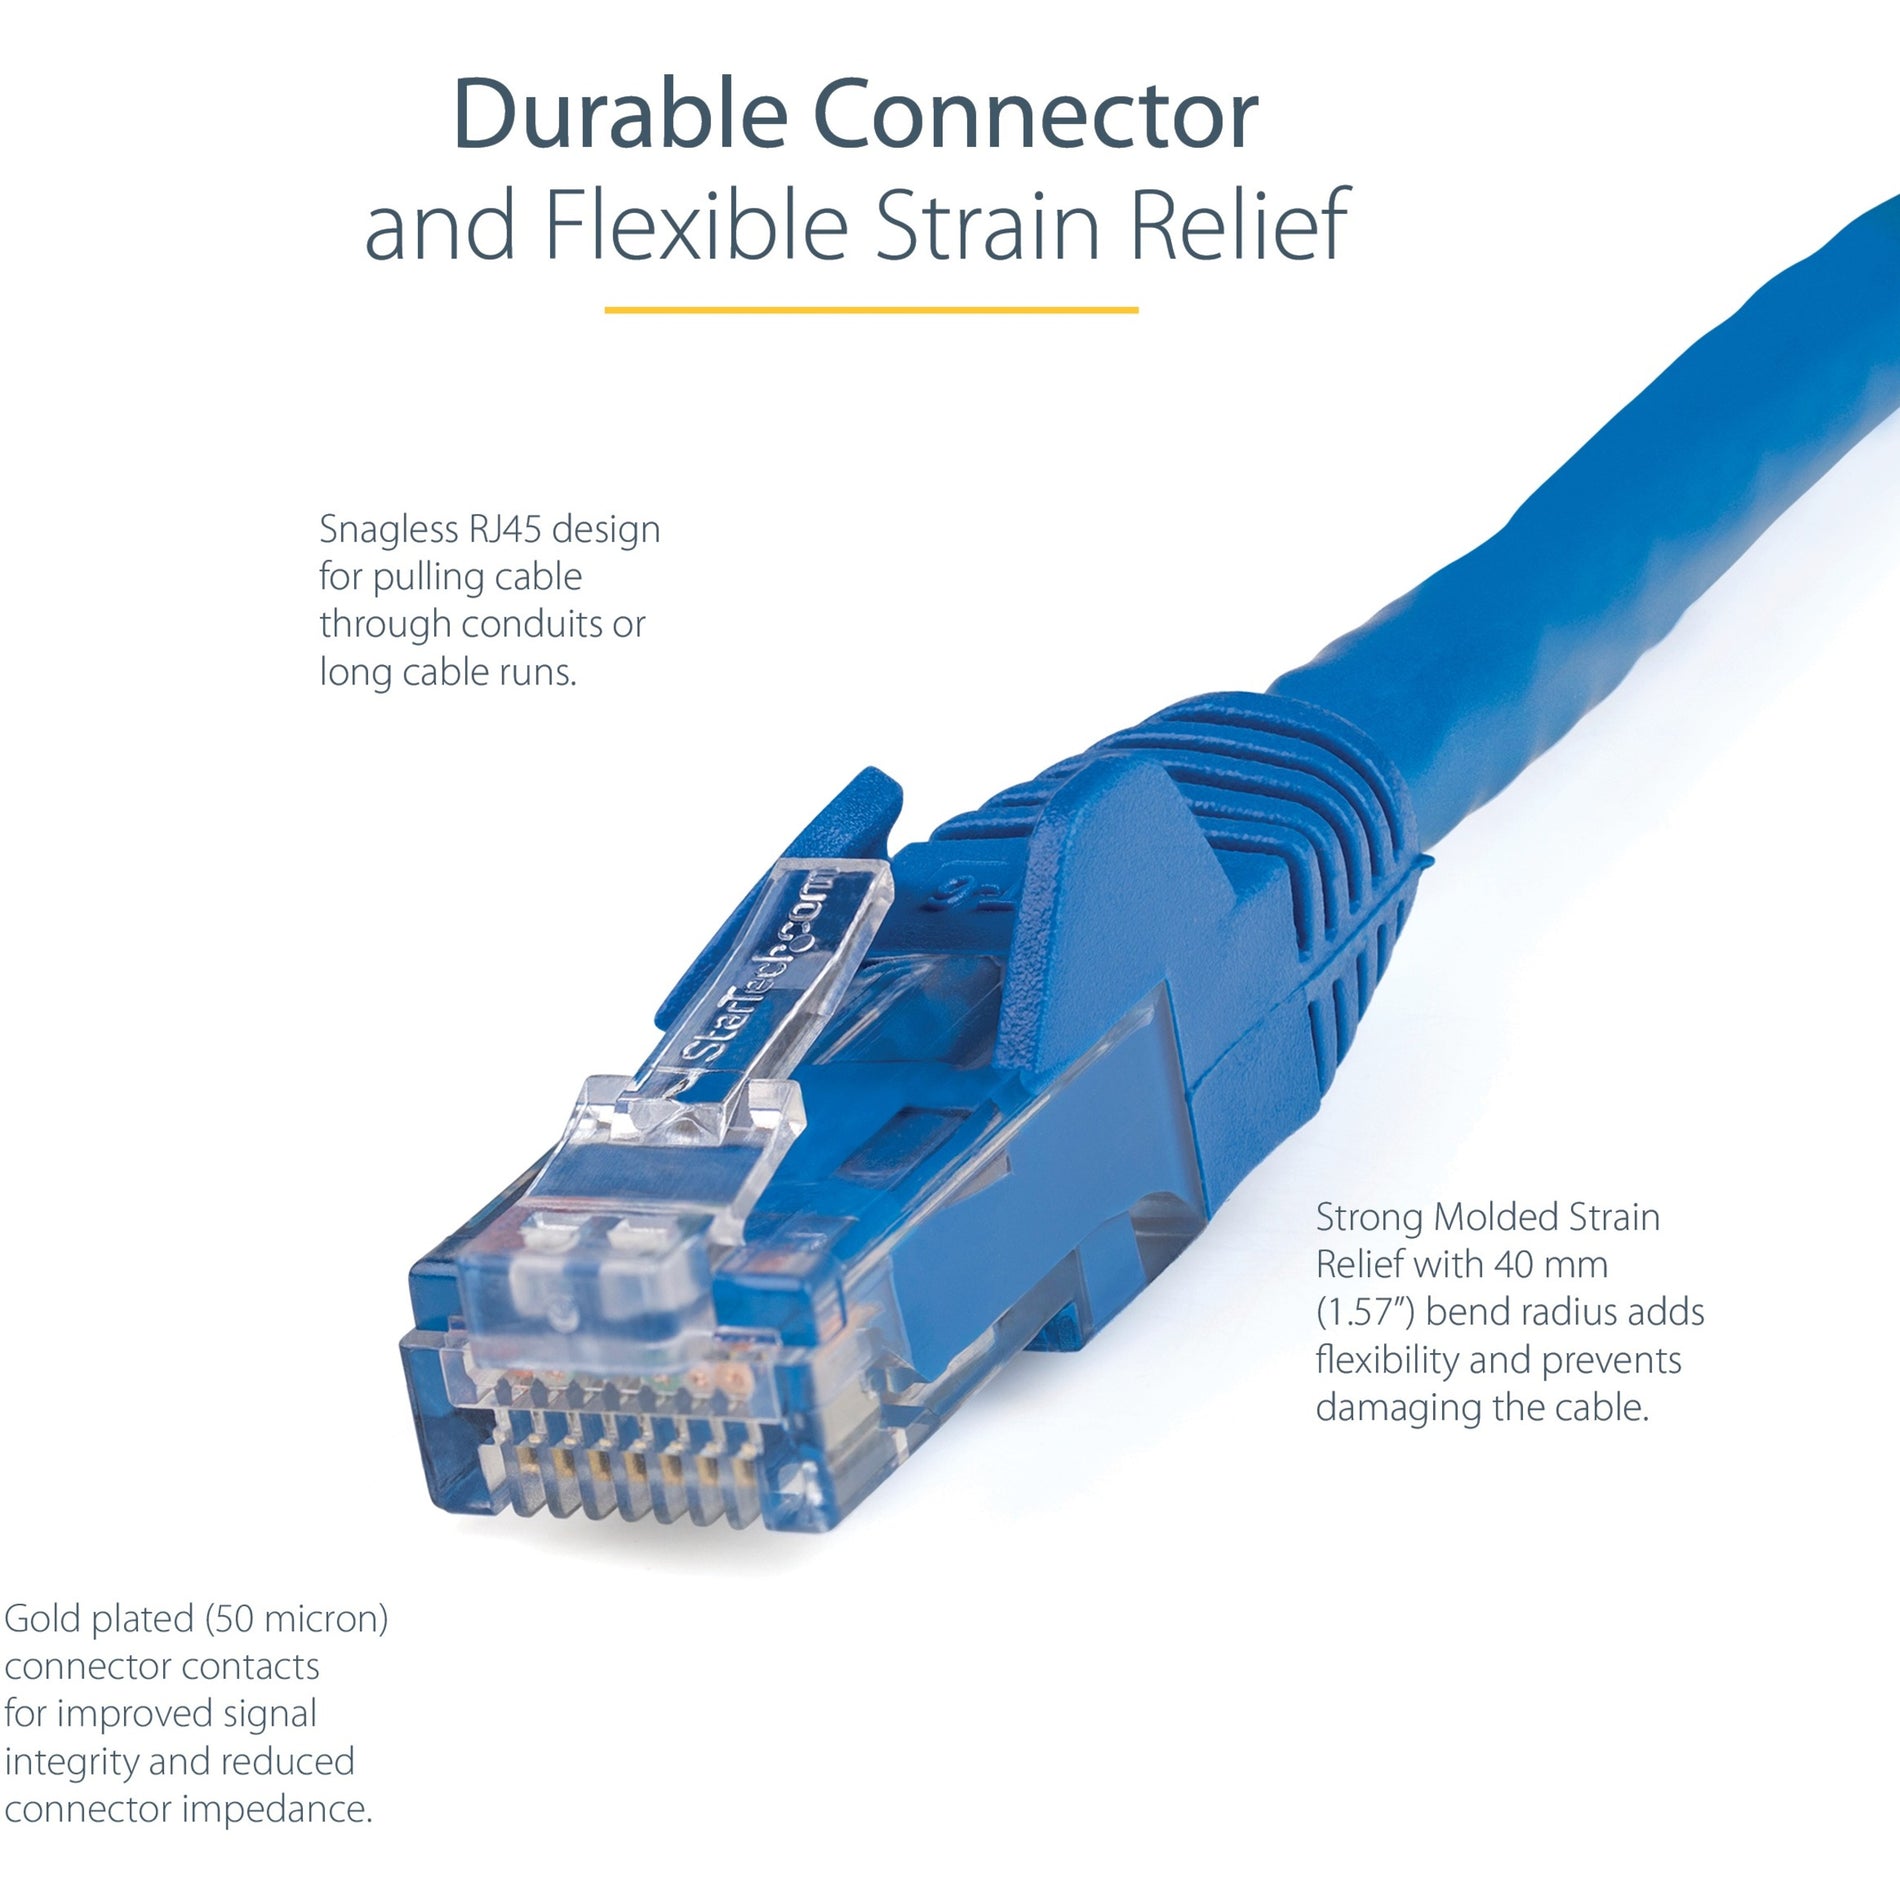 StarTech.com N6PATCH10BL 10 ft Blue Snagless Cat6 Patch Cable, ETL Verified, Lifetime Warranty, 10 Gbit/s Data Transfer Rate, Gold Plated Connectors